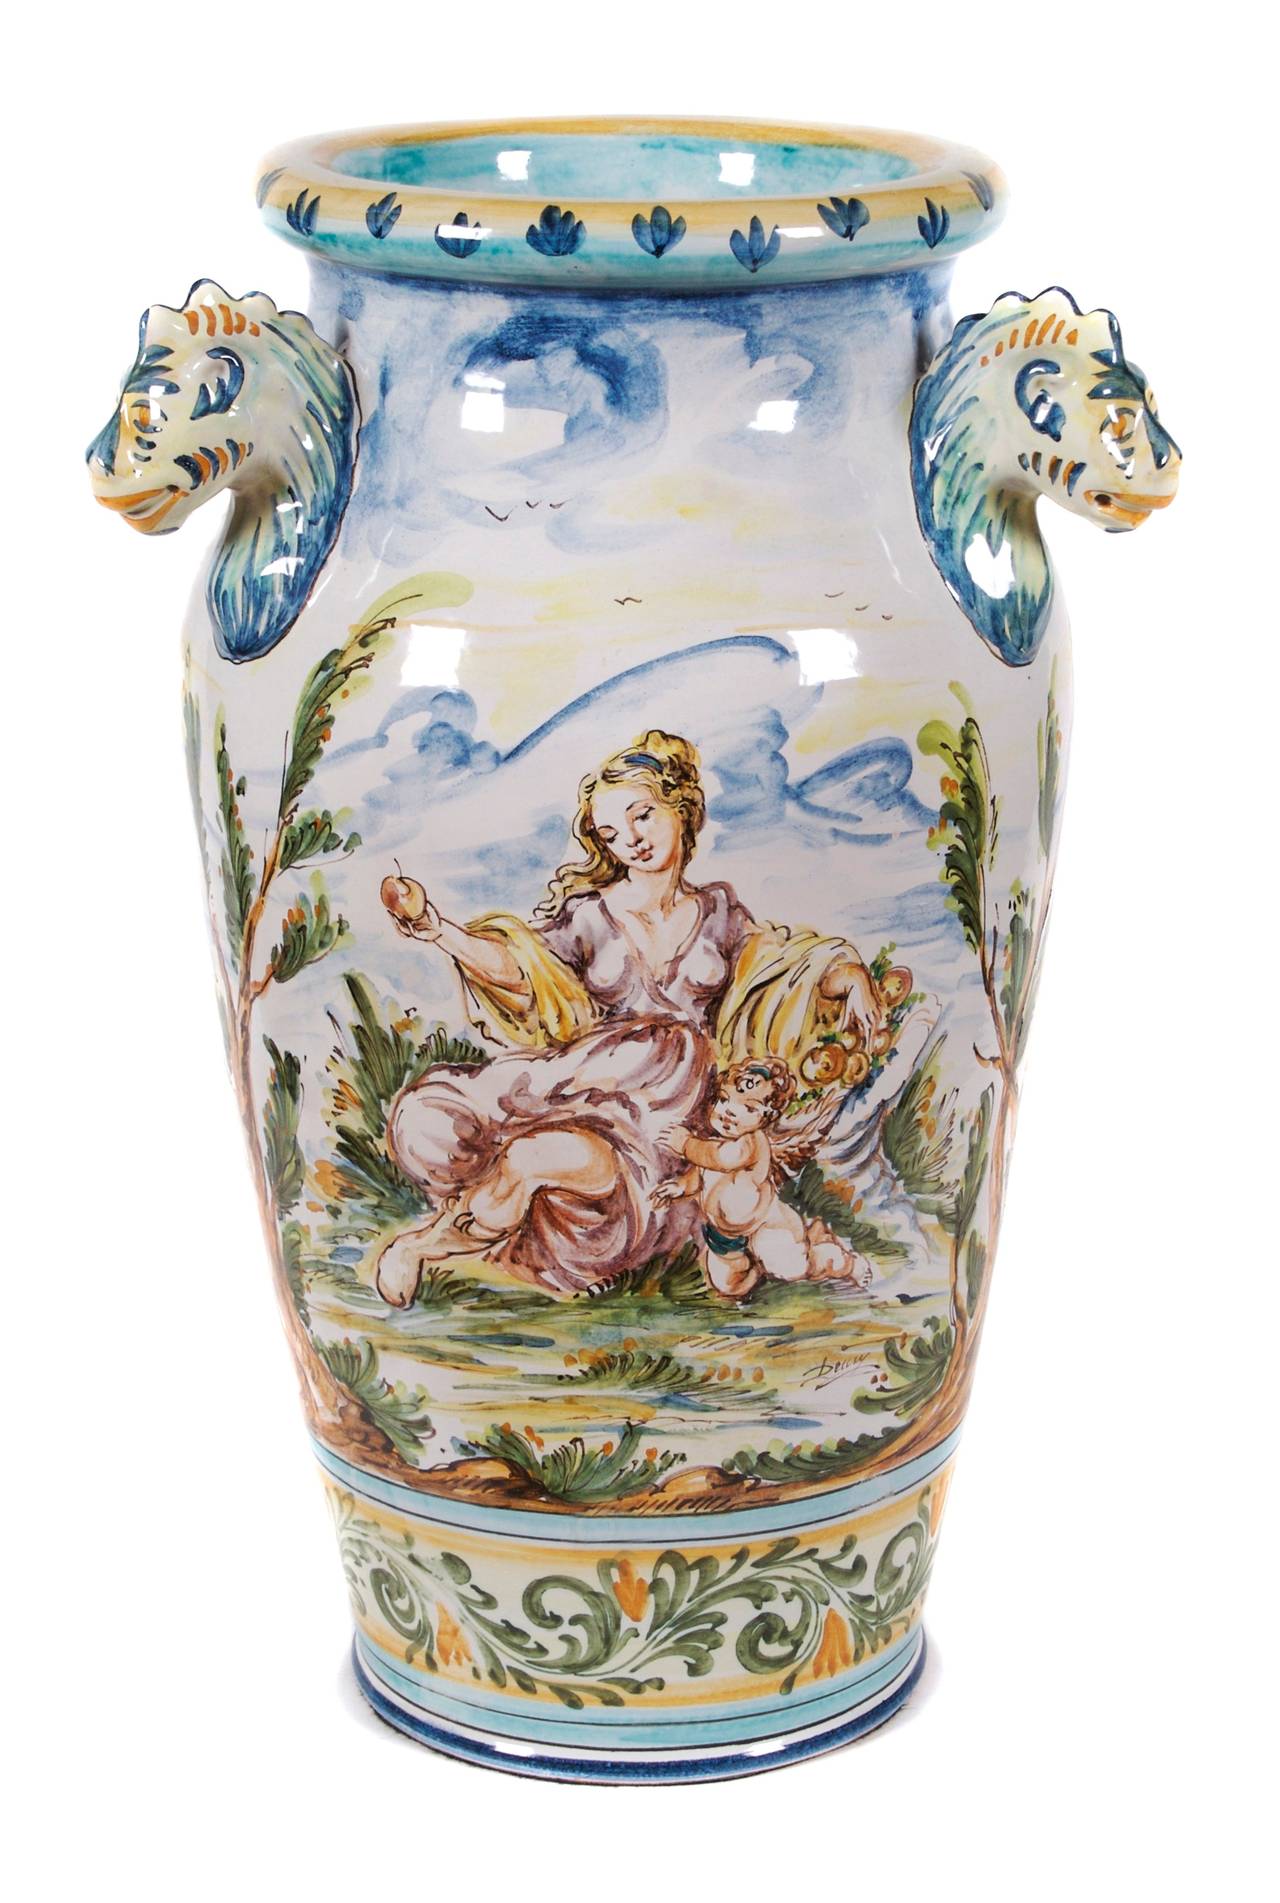 Lovely pair of large Italian majolica vases by Giuseppe Mazzotti, circa 1930. Very detailed hand painting on body and four animal head handles.

Giuseppe Mazzotti opened his ceramic manufactury in Albisola, a town on the Italian Riviera, in 1903.